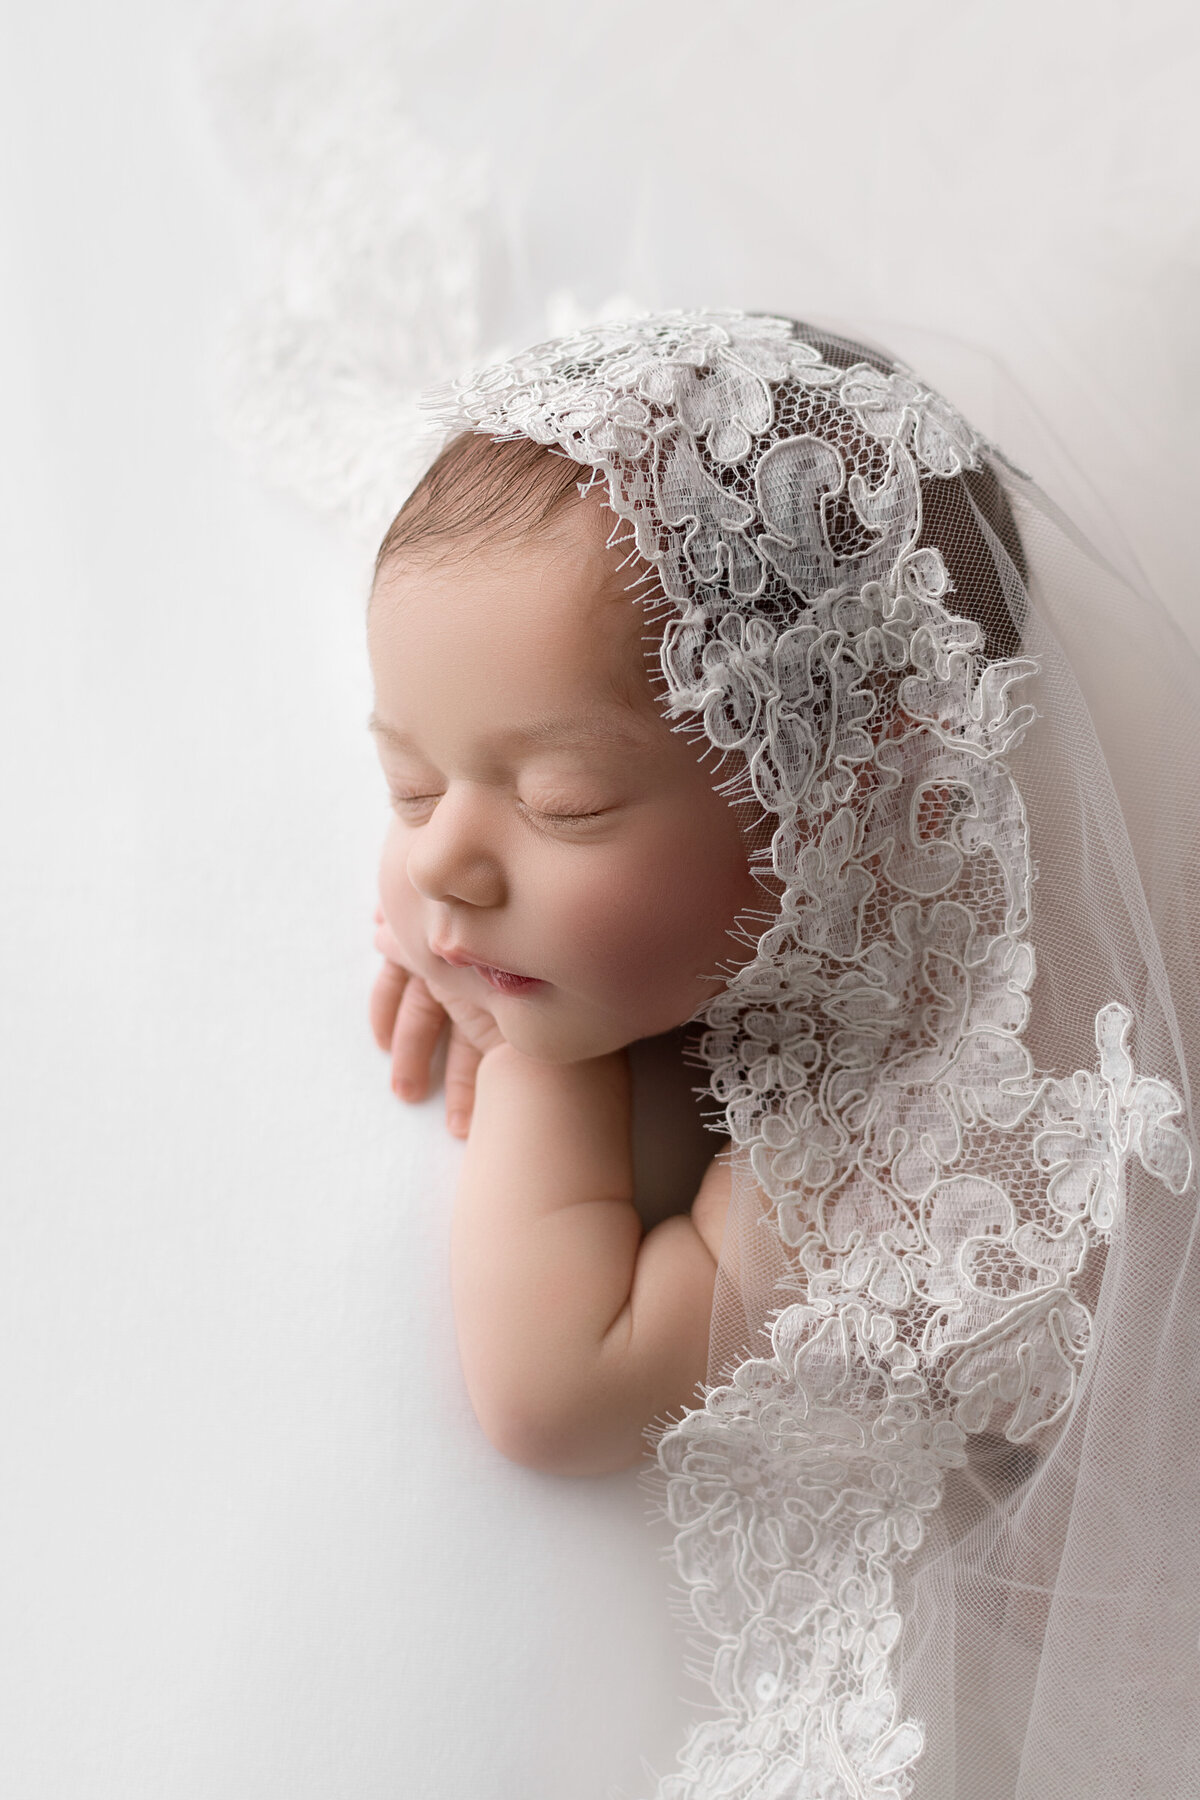 Aerial image. Newborn baby girl is sleeping on her belly with her hands folded under her chin. Her mom's bridal veil is draped overtop of her. Captured by New Jersey's best newborn photographer Katie Marshall.